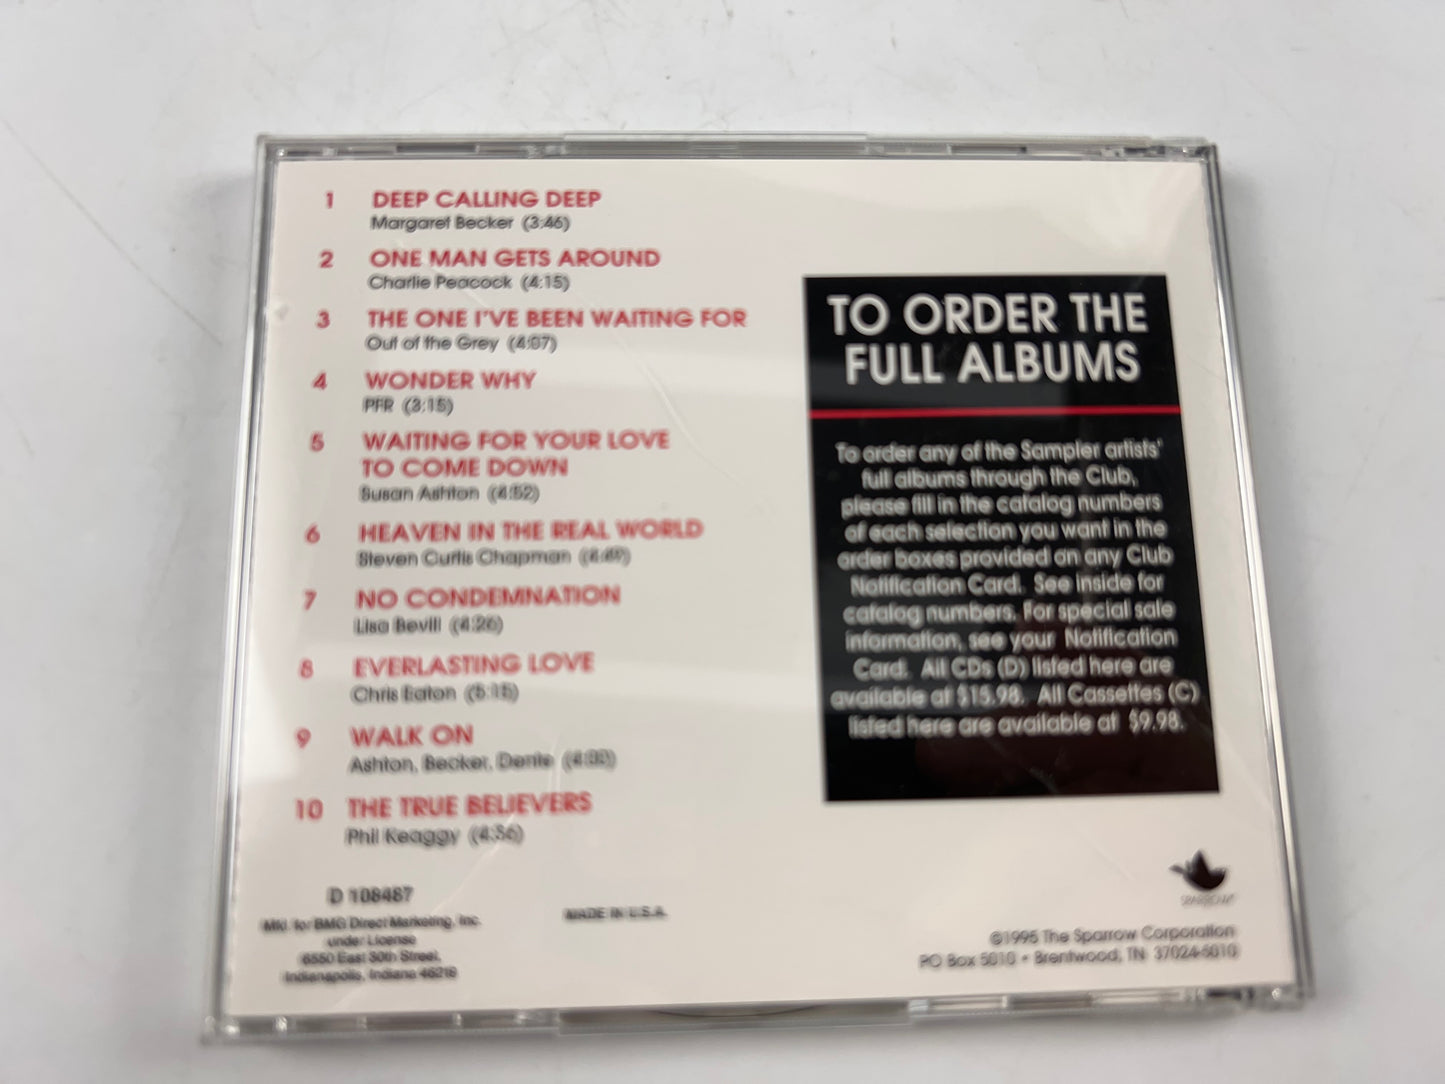 Contemporary Christian music Hearing is Believing CD 1995